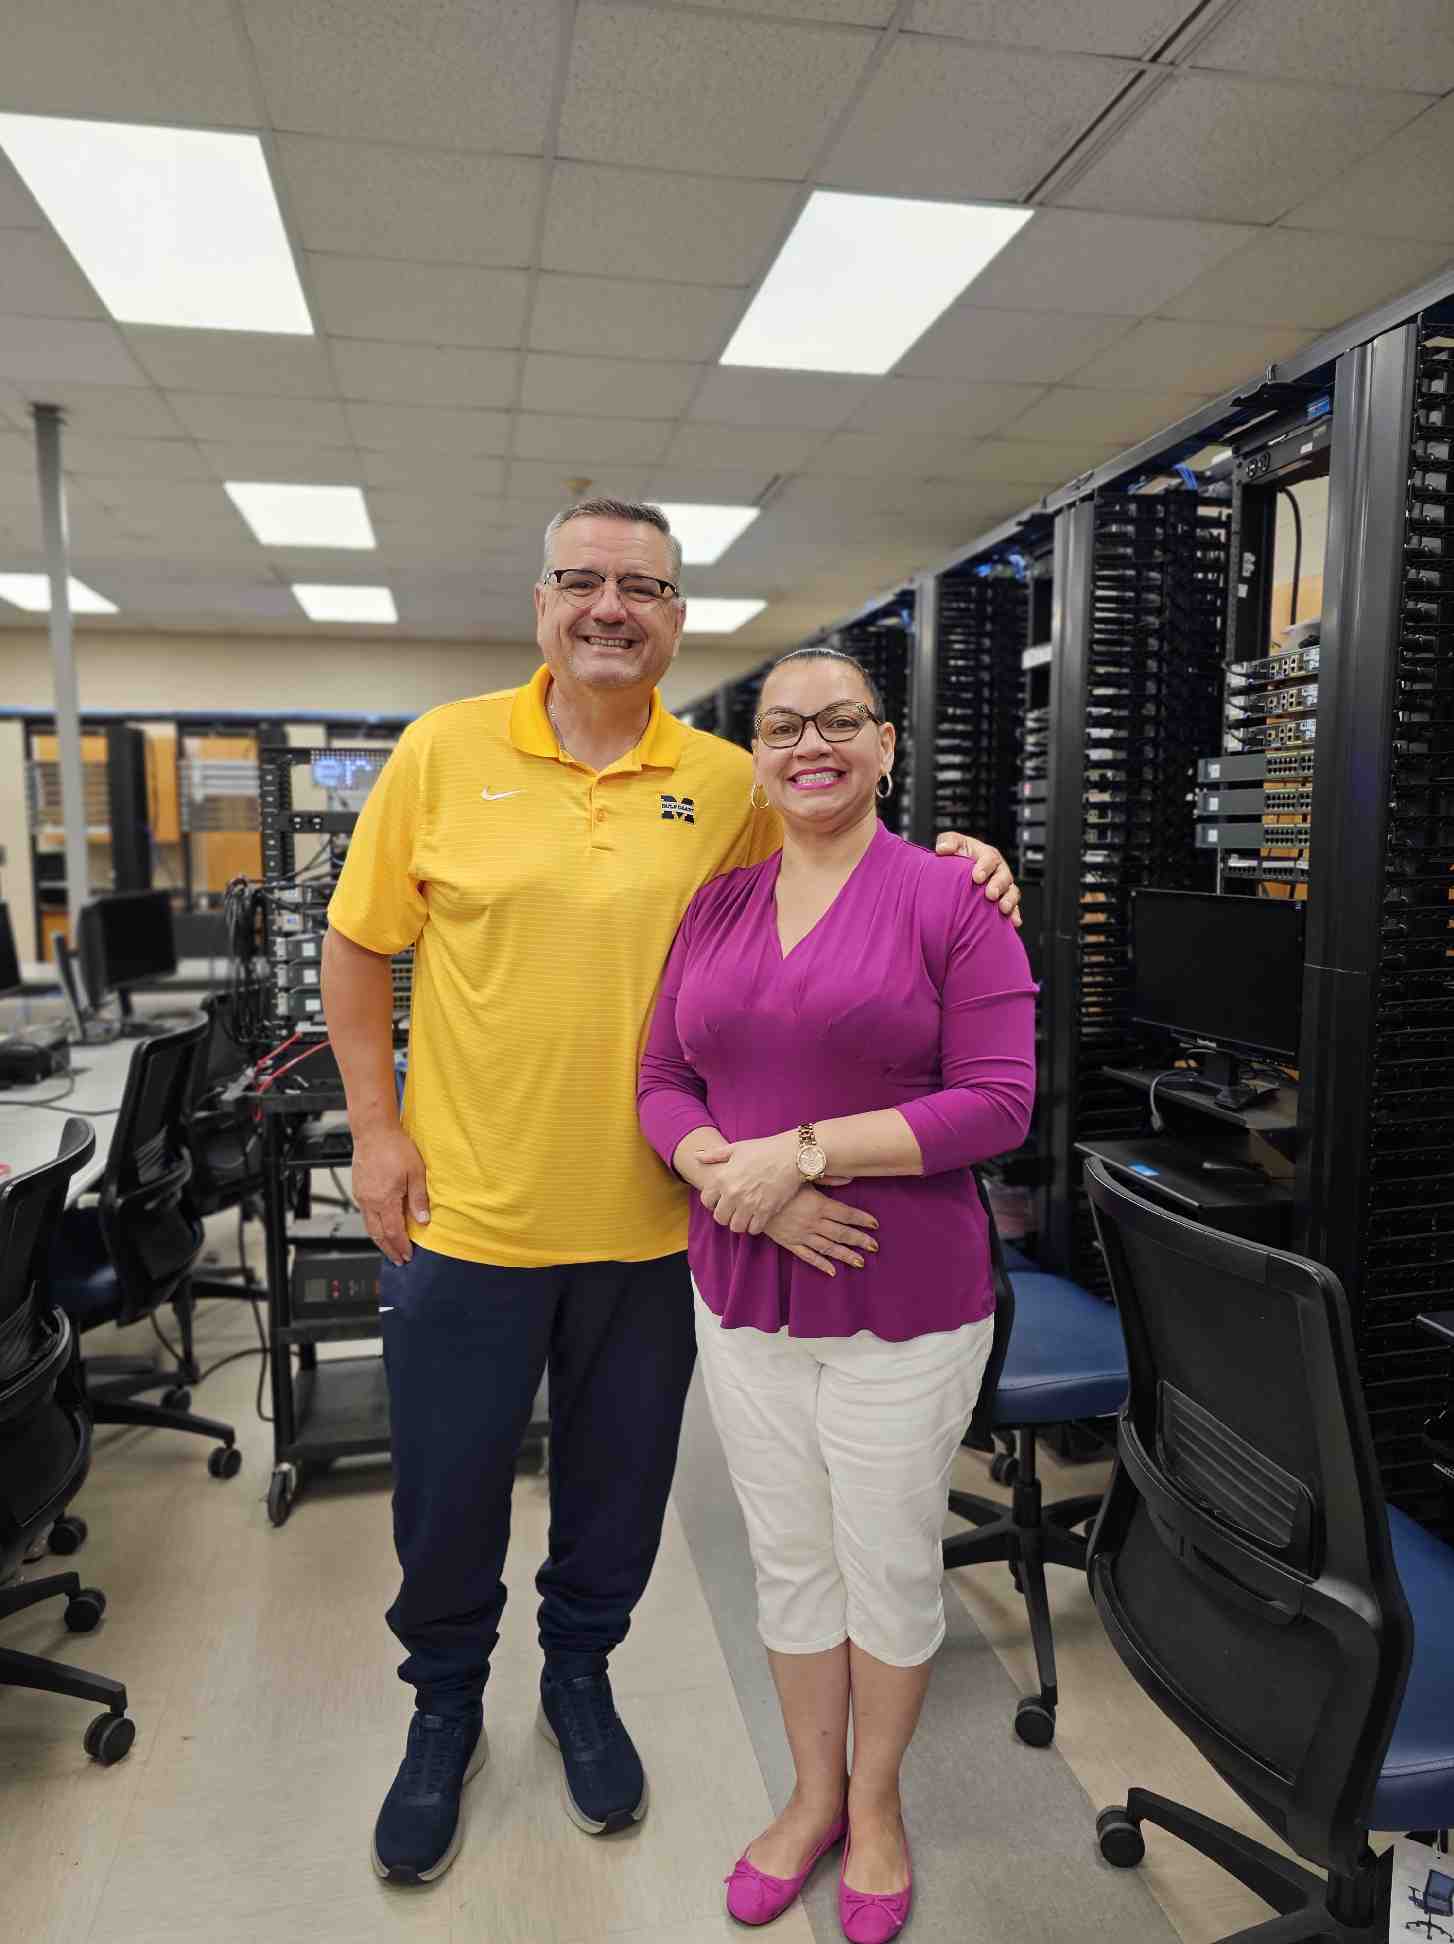 MGCCC student Diane Lopez-Martell is one of only two students selected for the Cisco Dream Team